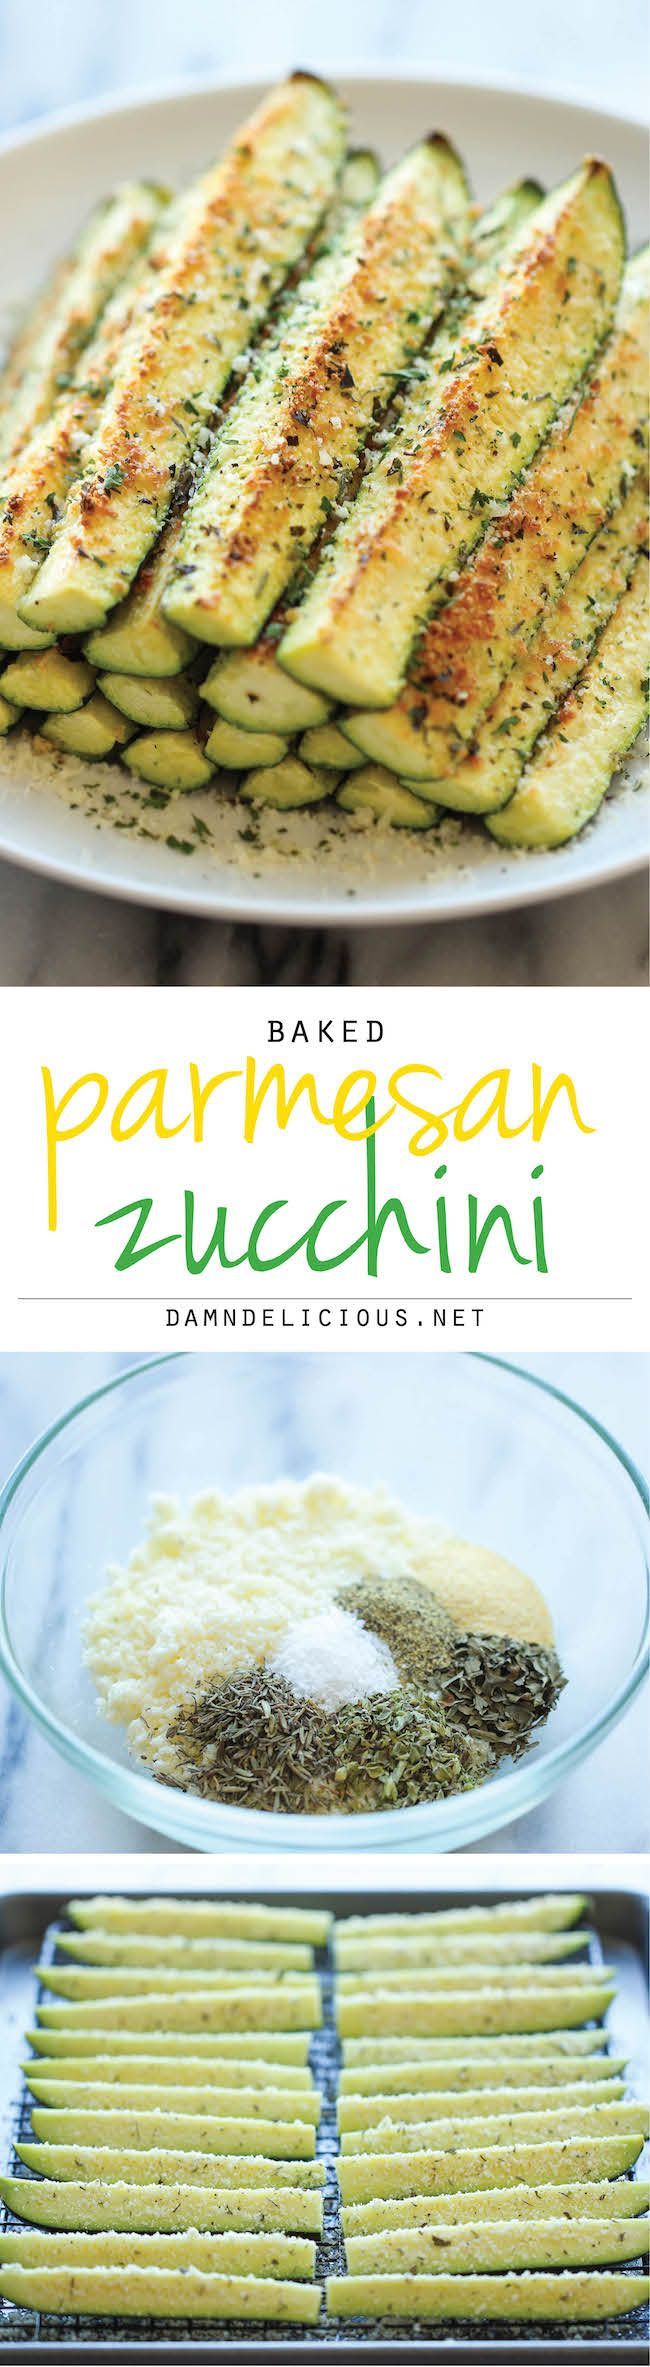 Baked Parmesan Zucchini – Crisp, tender zucchini sticks oven-roasted to perfection. It’s healthy, nutr